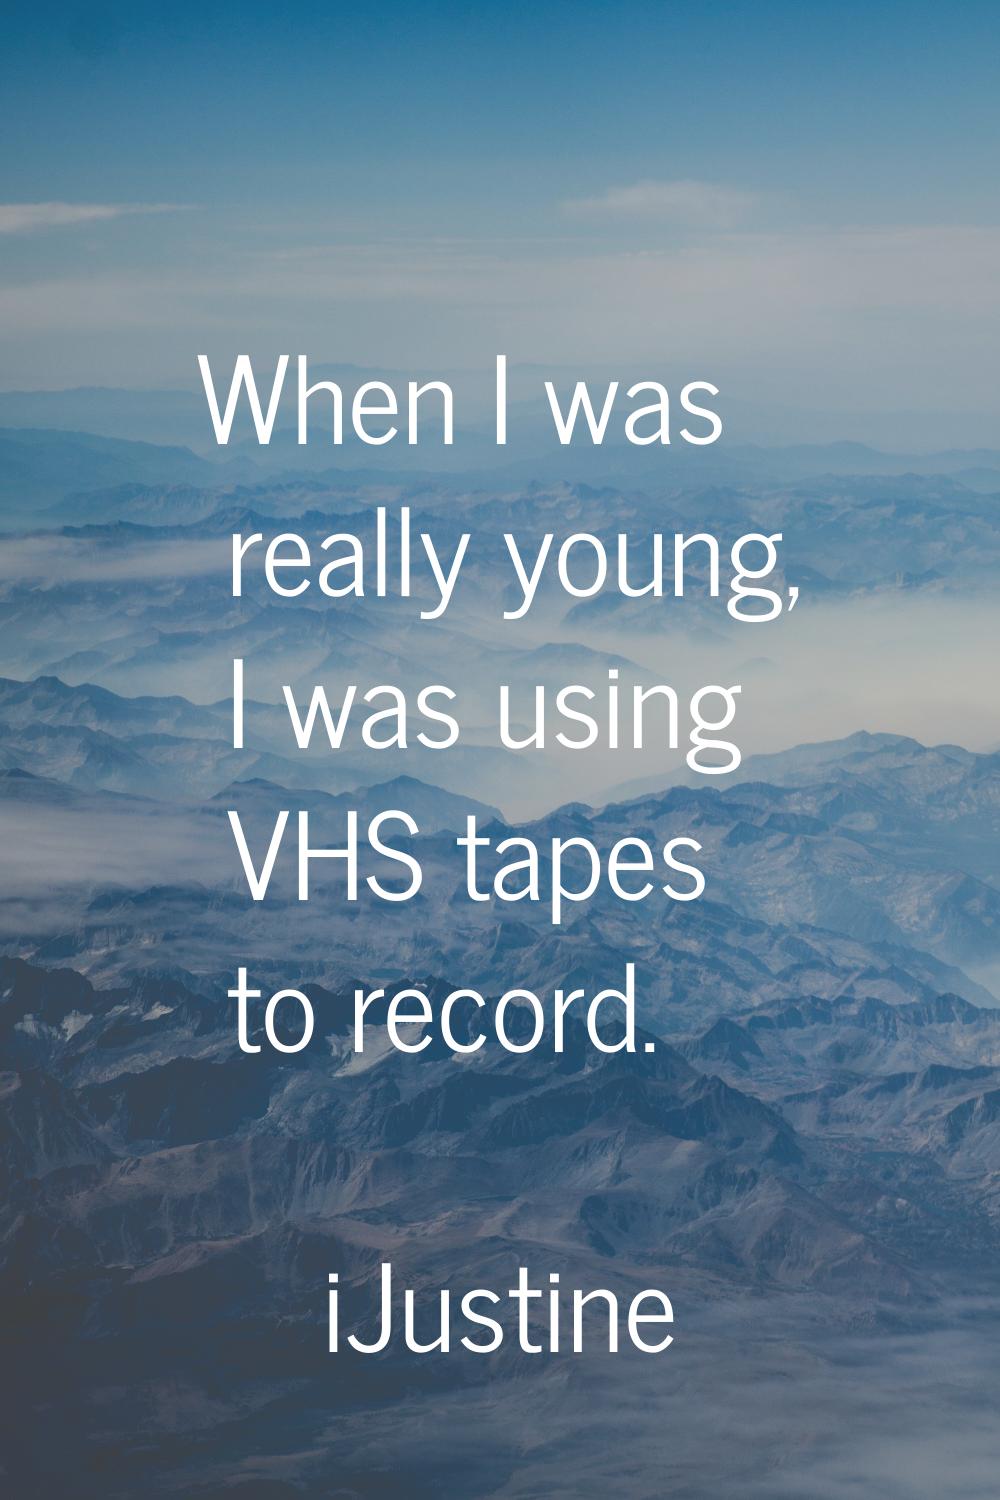 When I was really young, I was using VHS tapes to record.